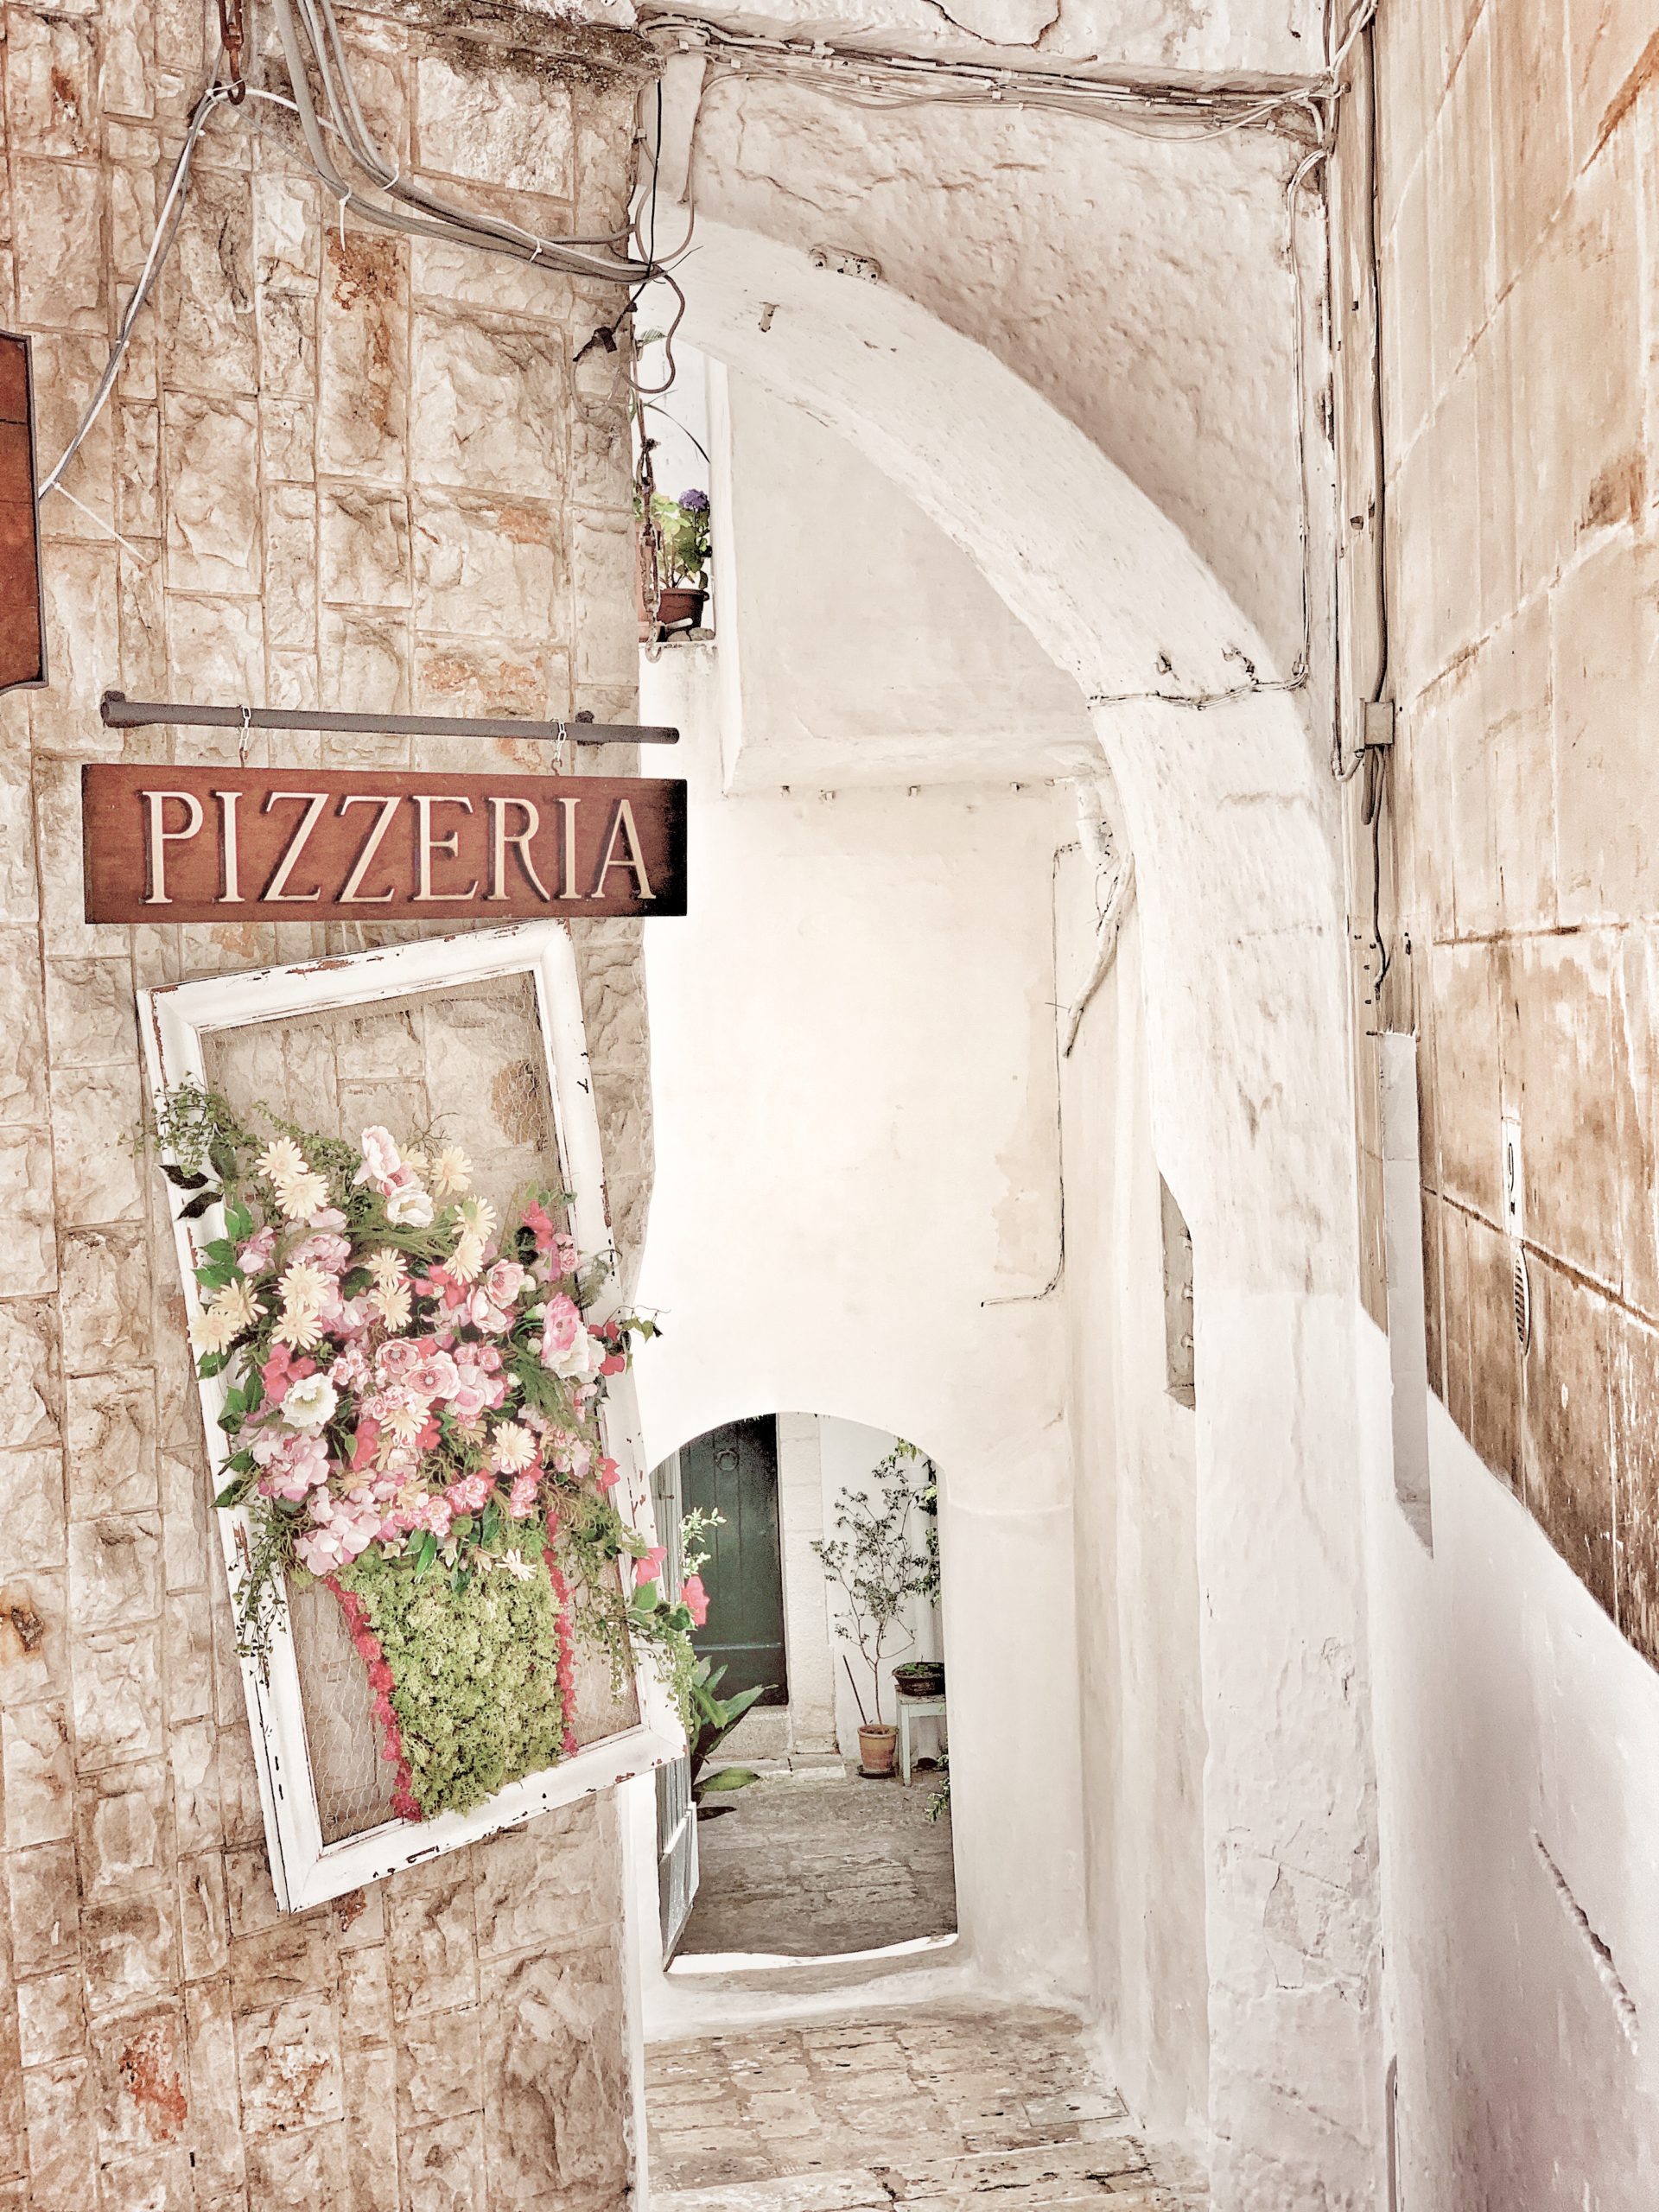 The narrow winding alleyways of Ostuni’s old town.